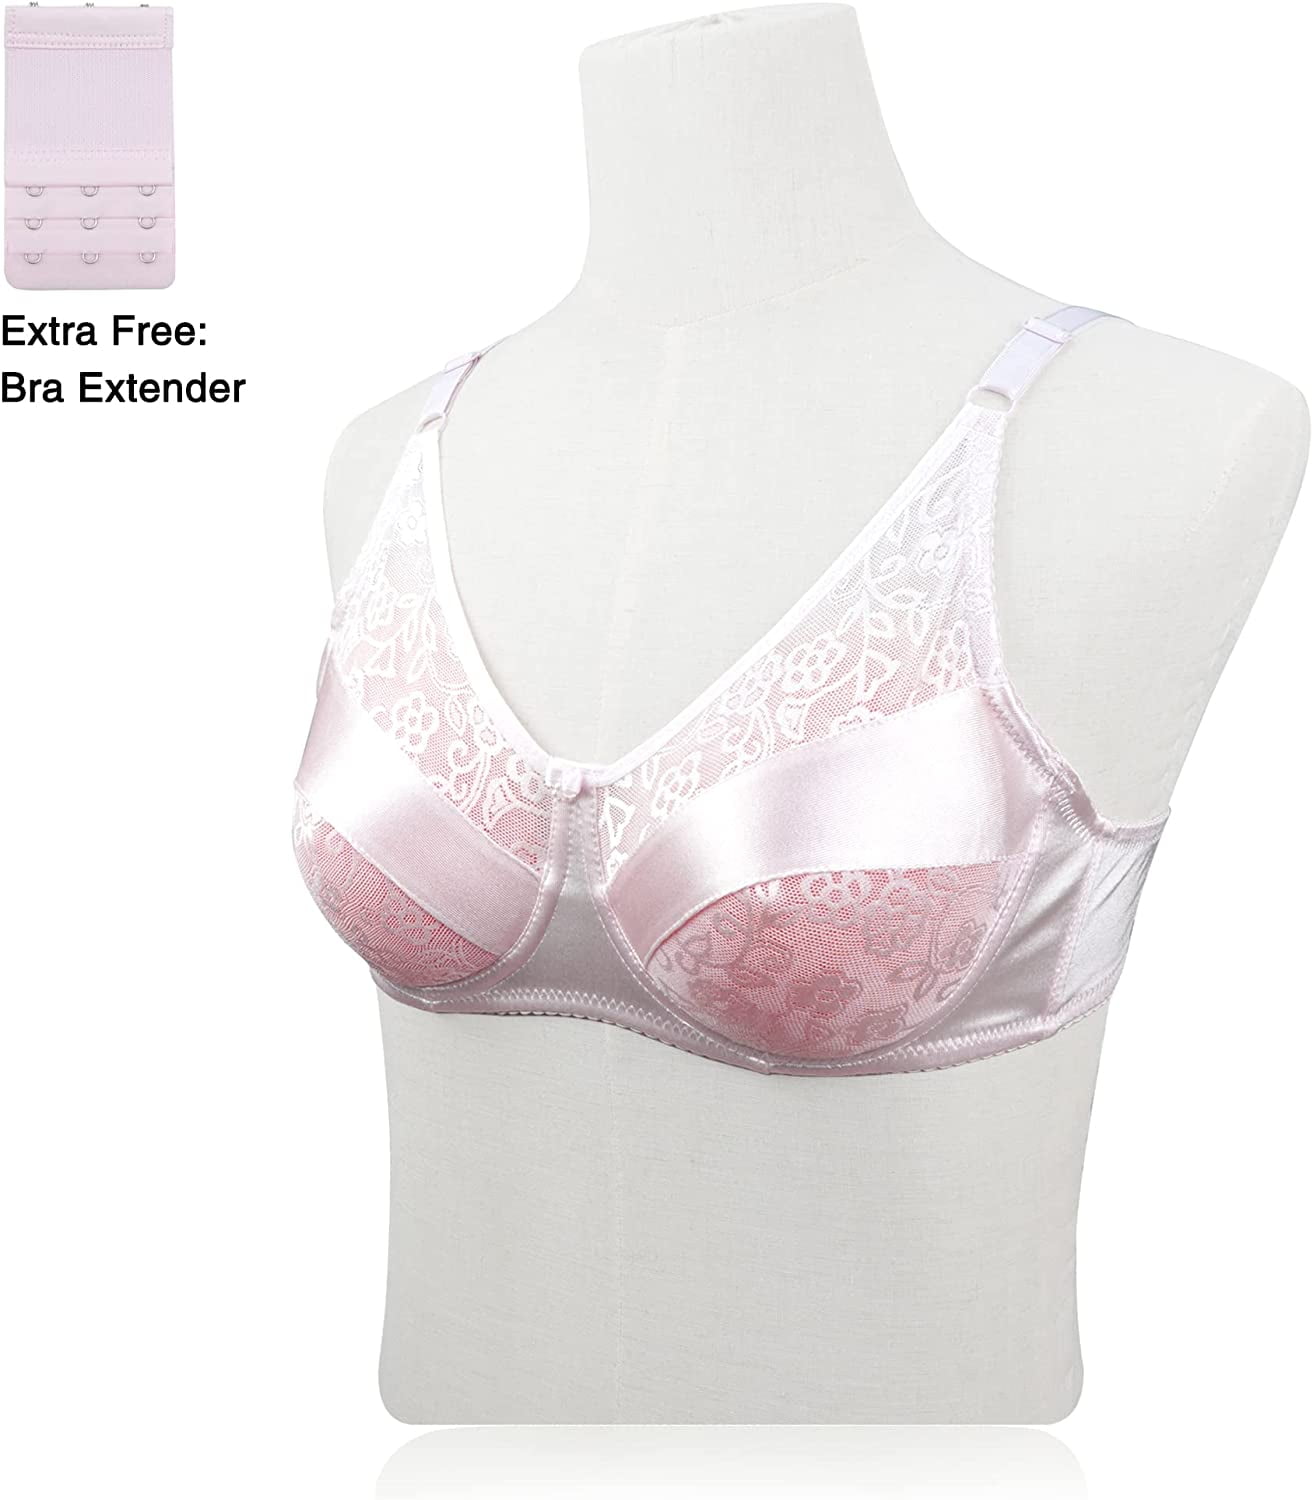 Special Pocket Bra for Silicone Breast Forms Post Surgery Mastectomy  Crossdress Beige Bra Size 40/90